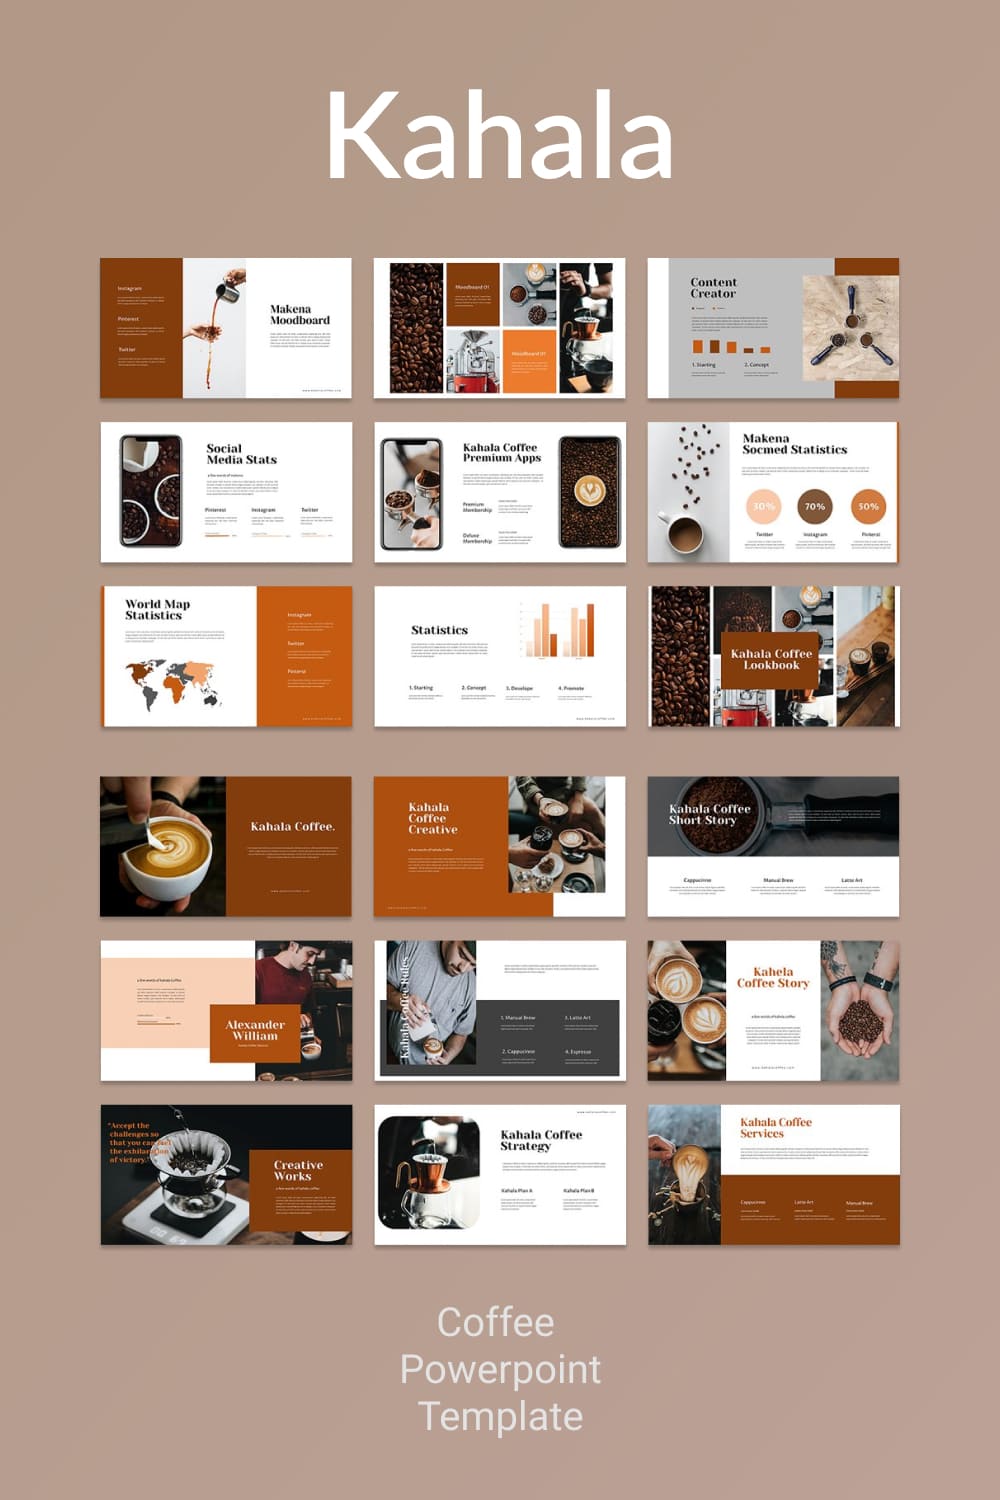 Collage of presentation pages with images of coffee beans, coffee cups and barista.